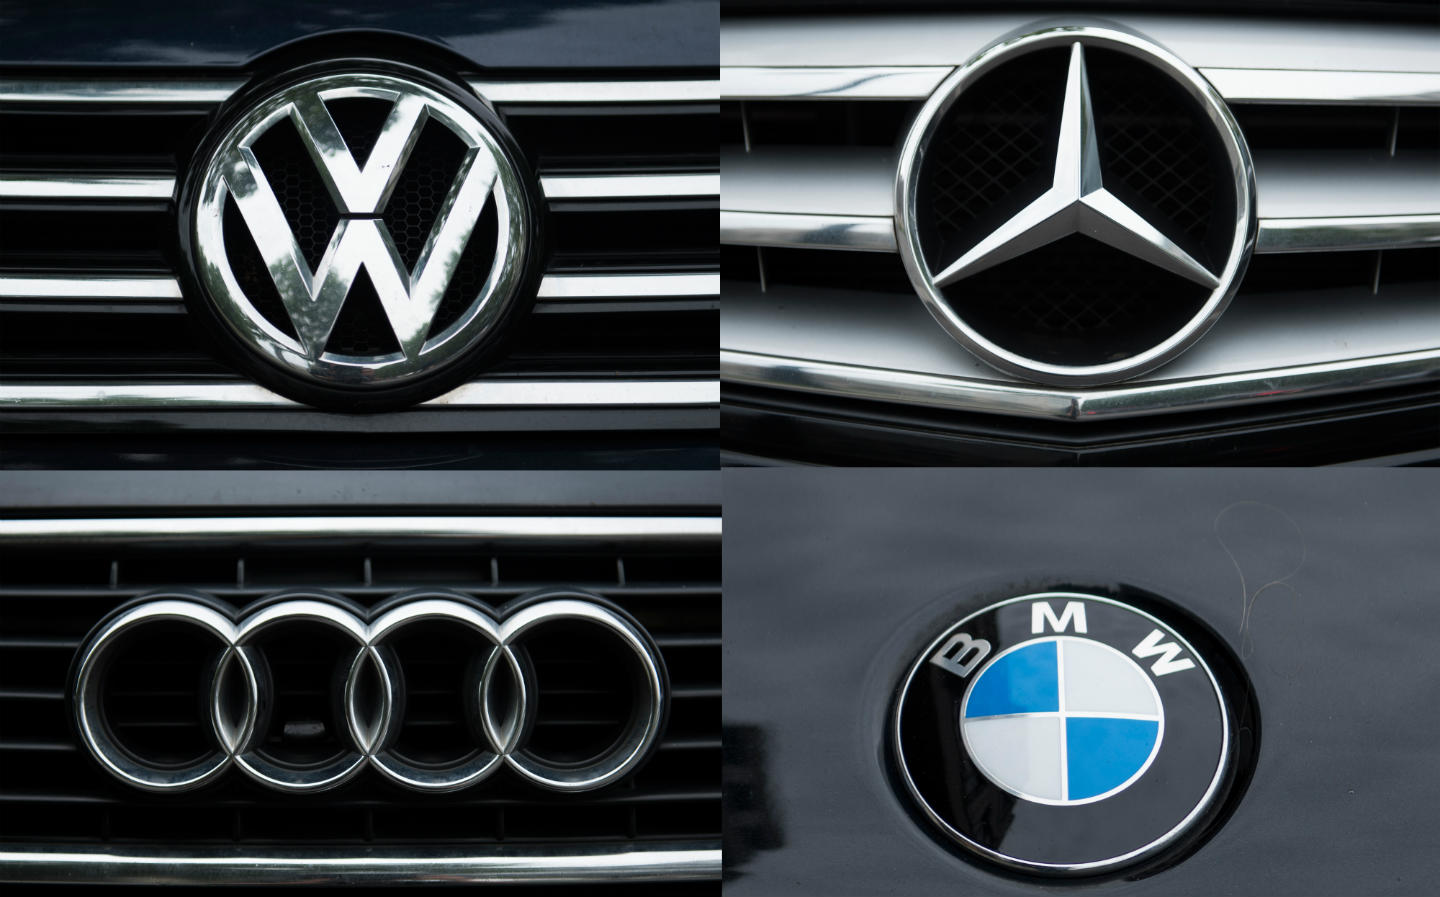 BMW, Mercedes, VW accused of colluding to delay clean emissions tech